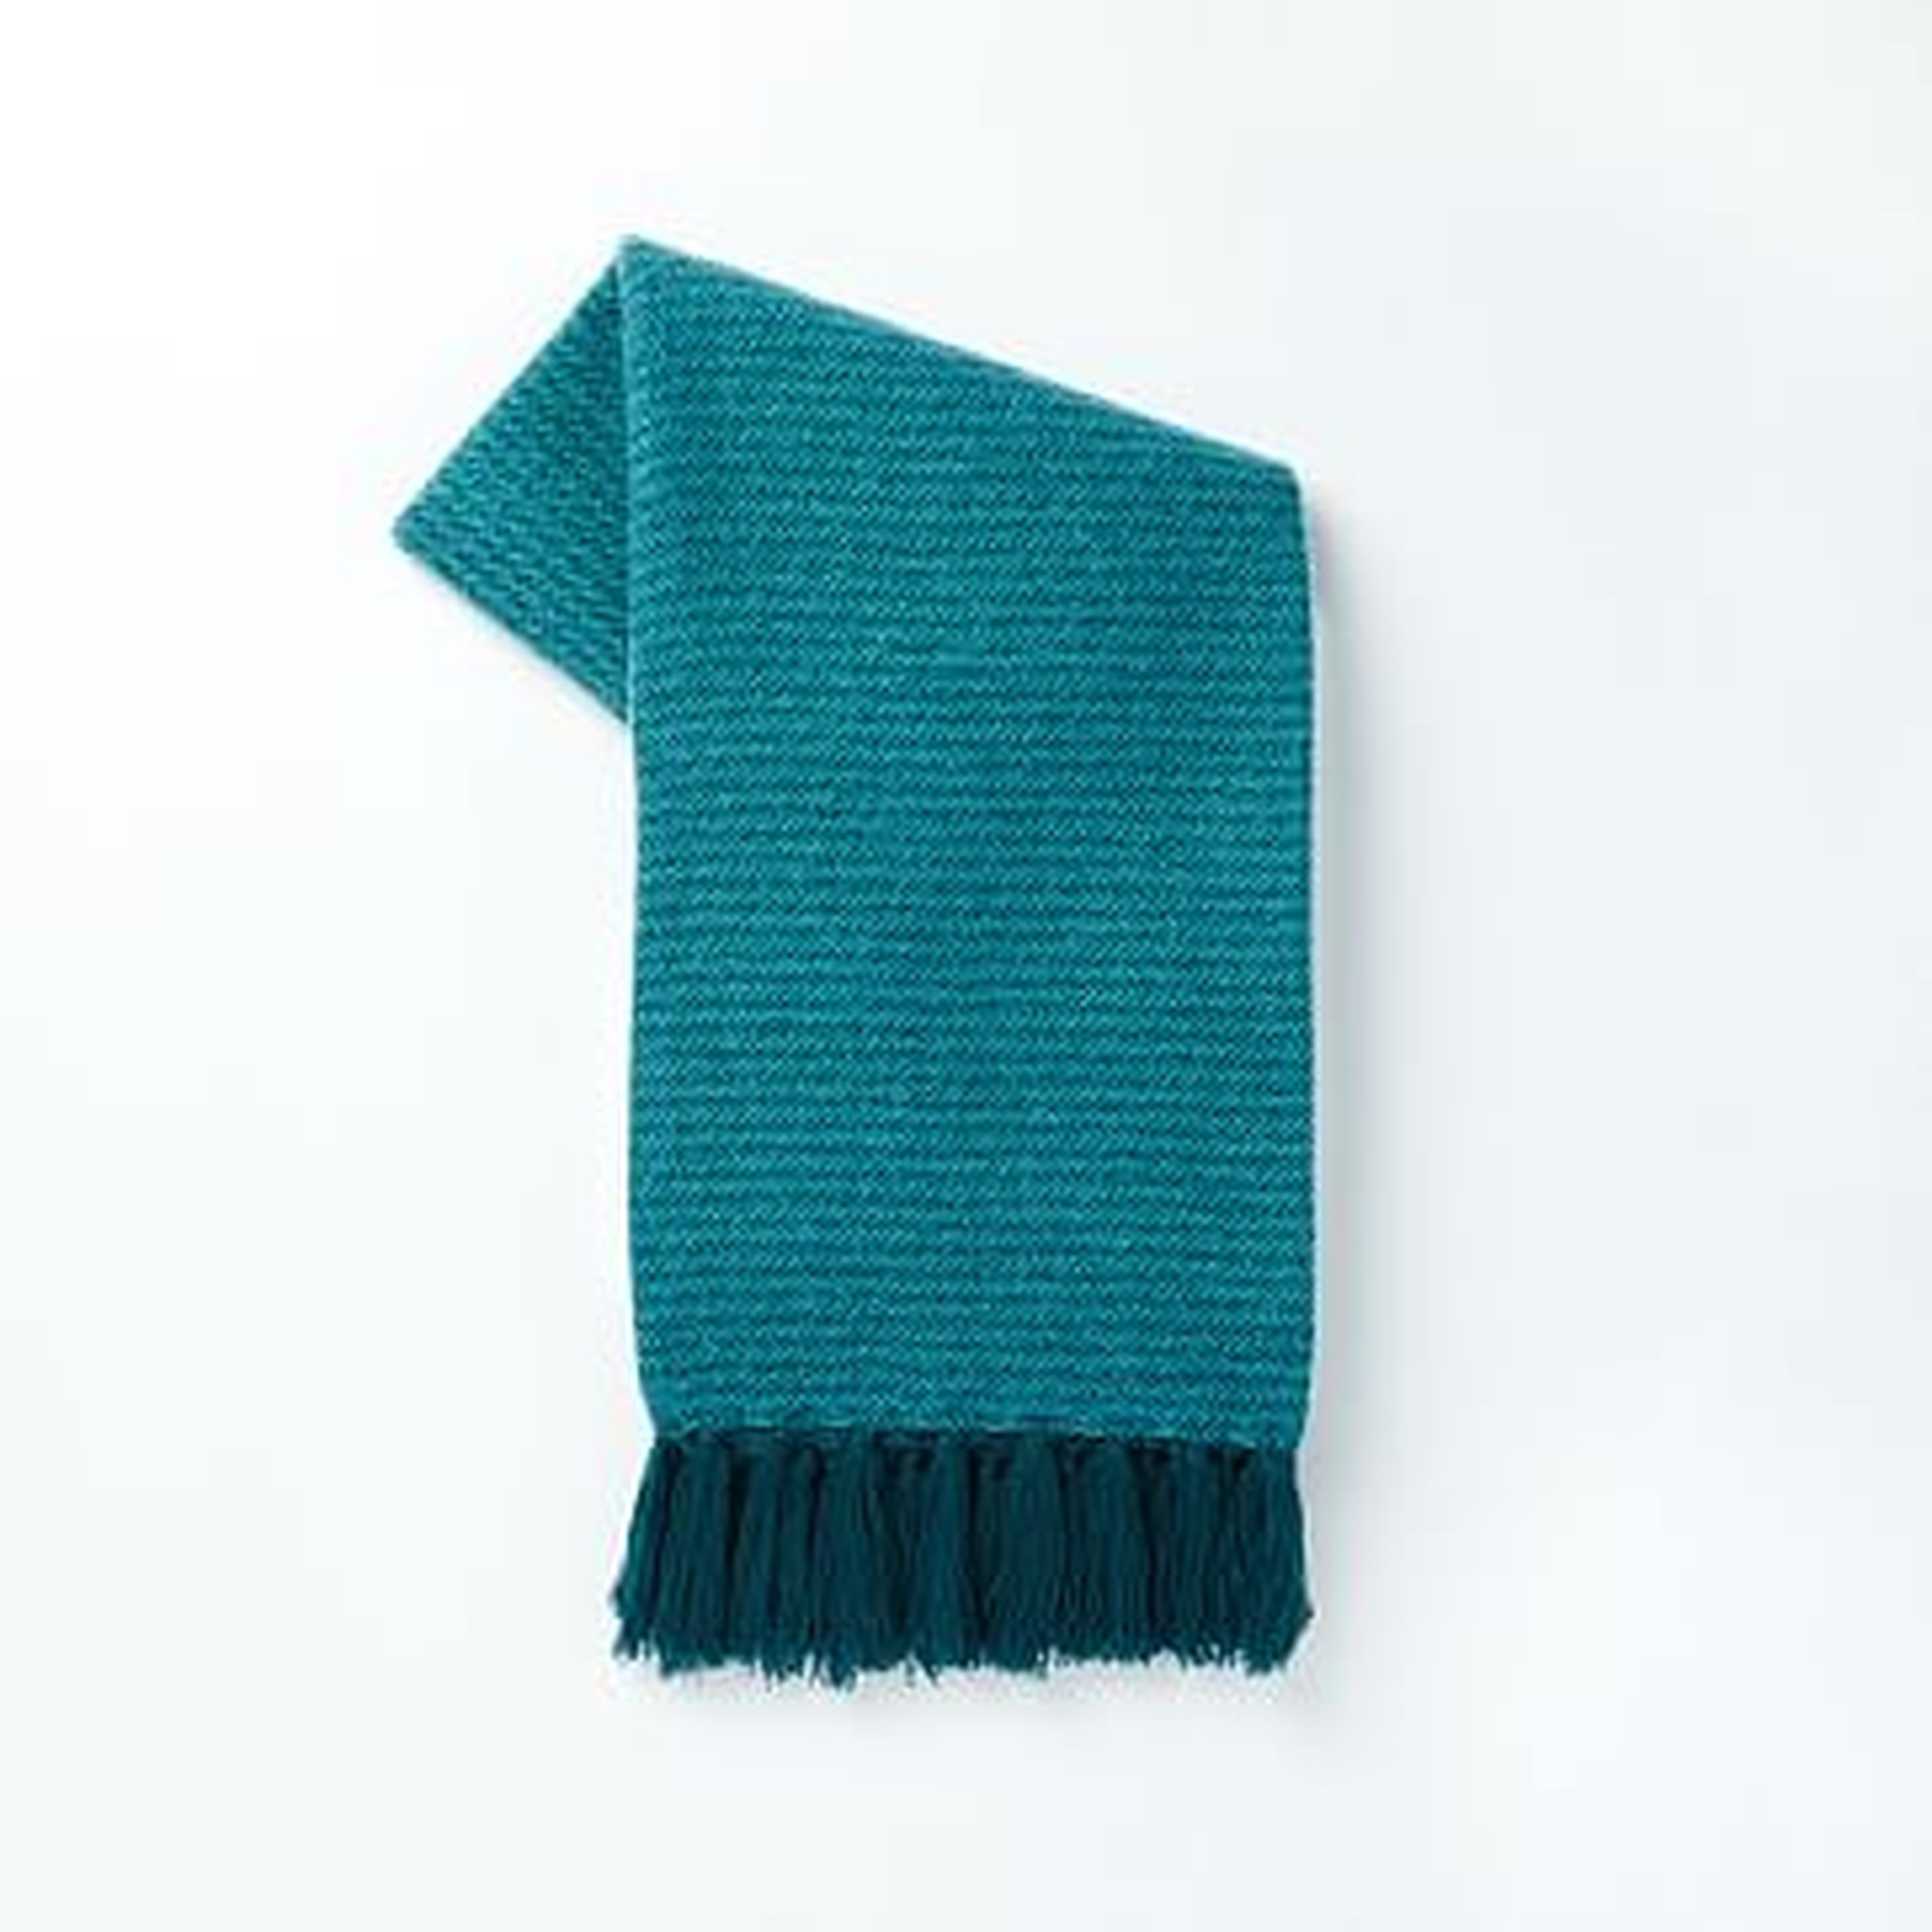 Coziest Solid Throw, 44"x56", Blue Teal - West Elm